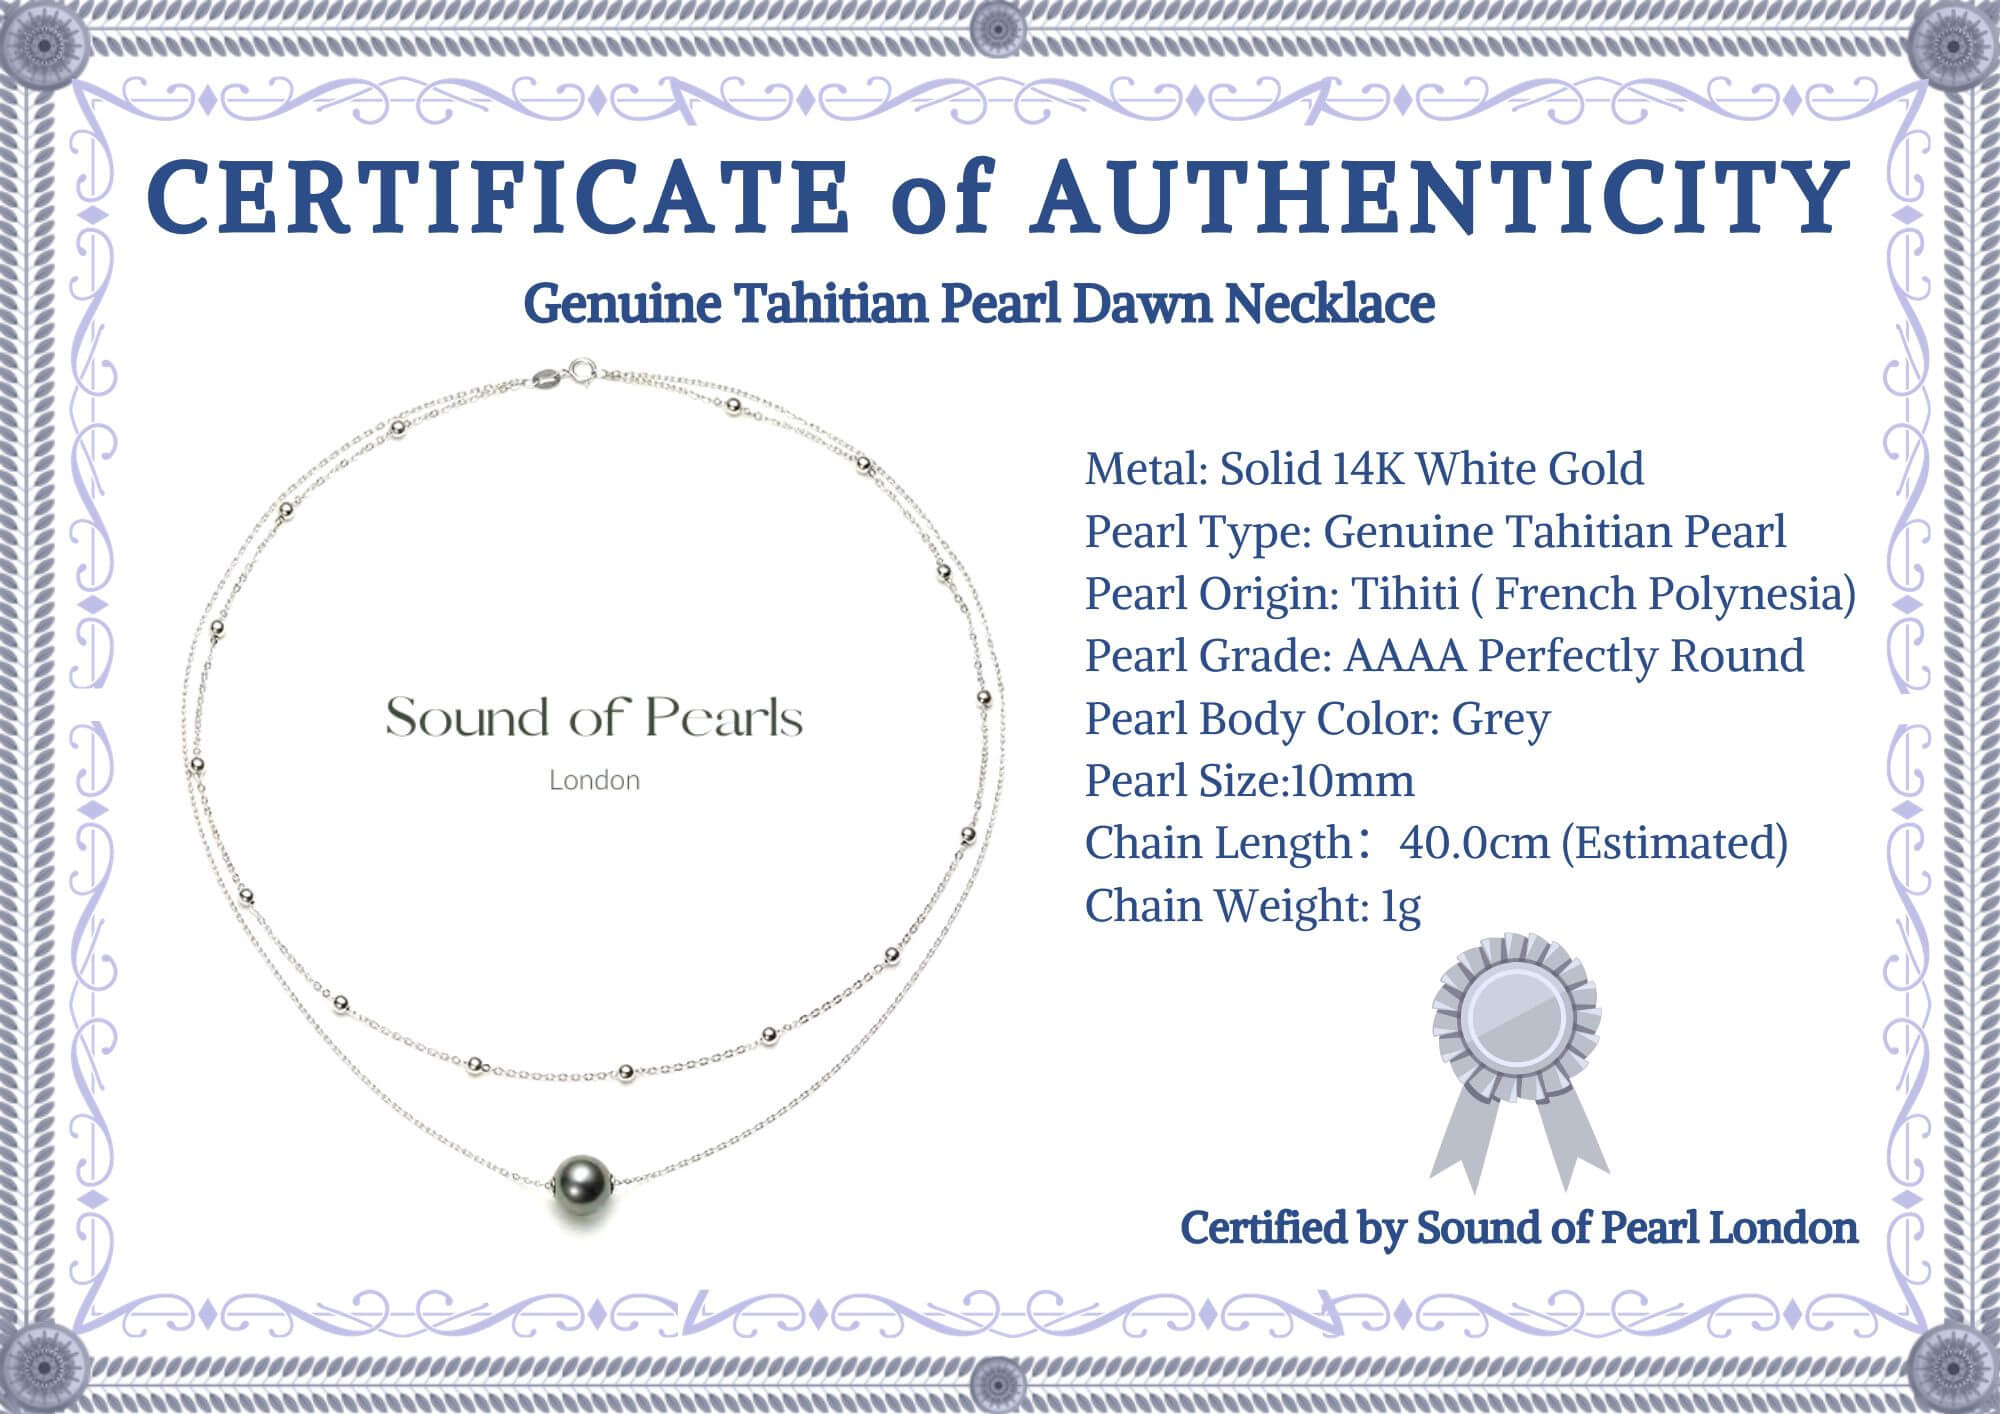 Solid 18K White Gold Genuine Tahitian Pearl Dawn Necklace